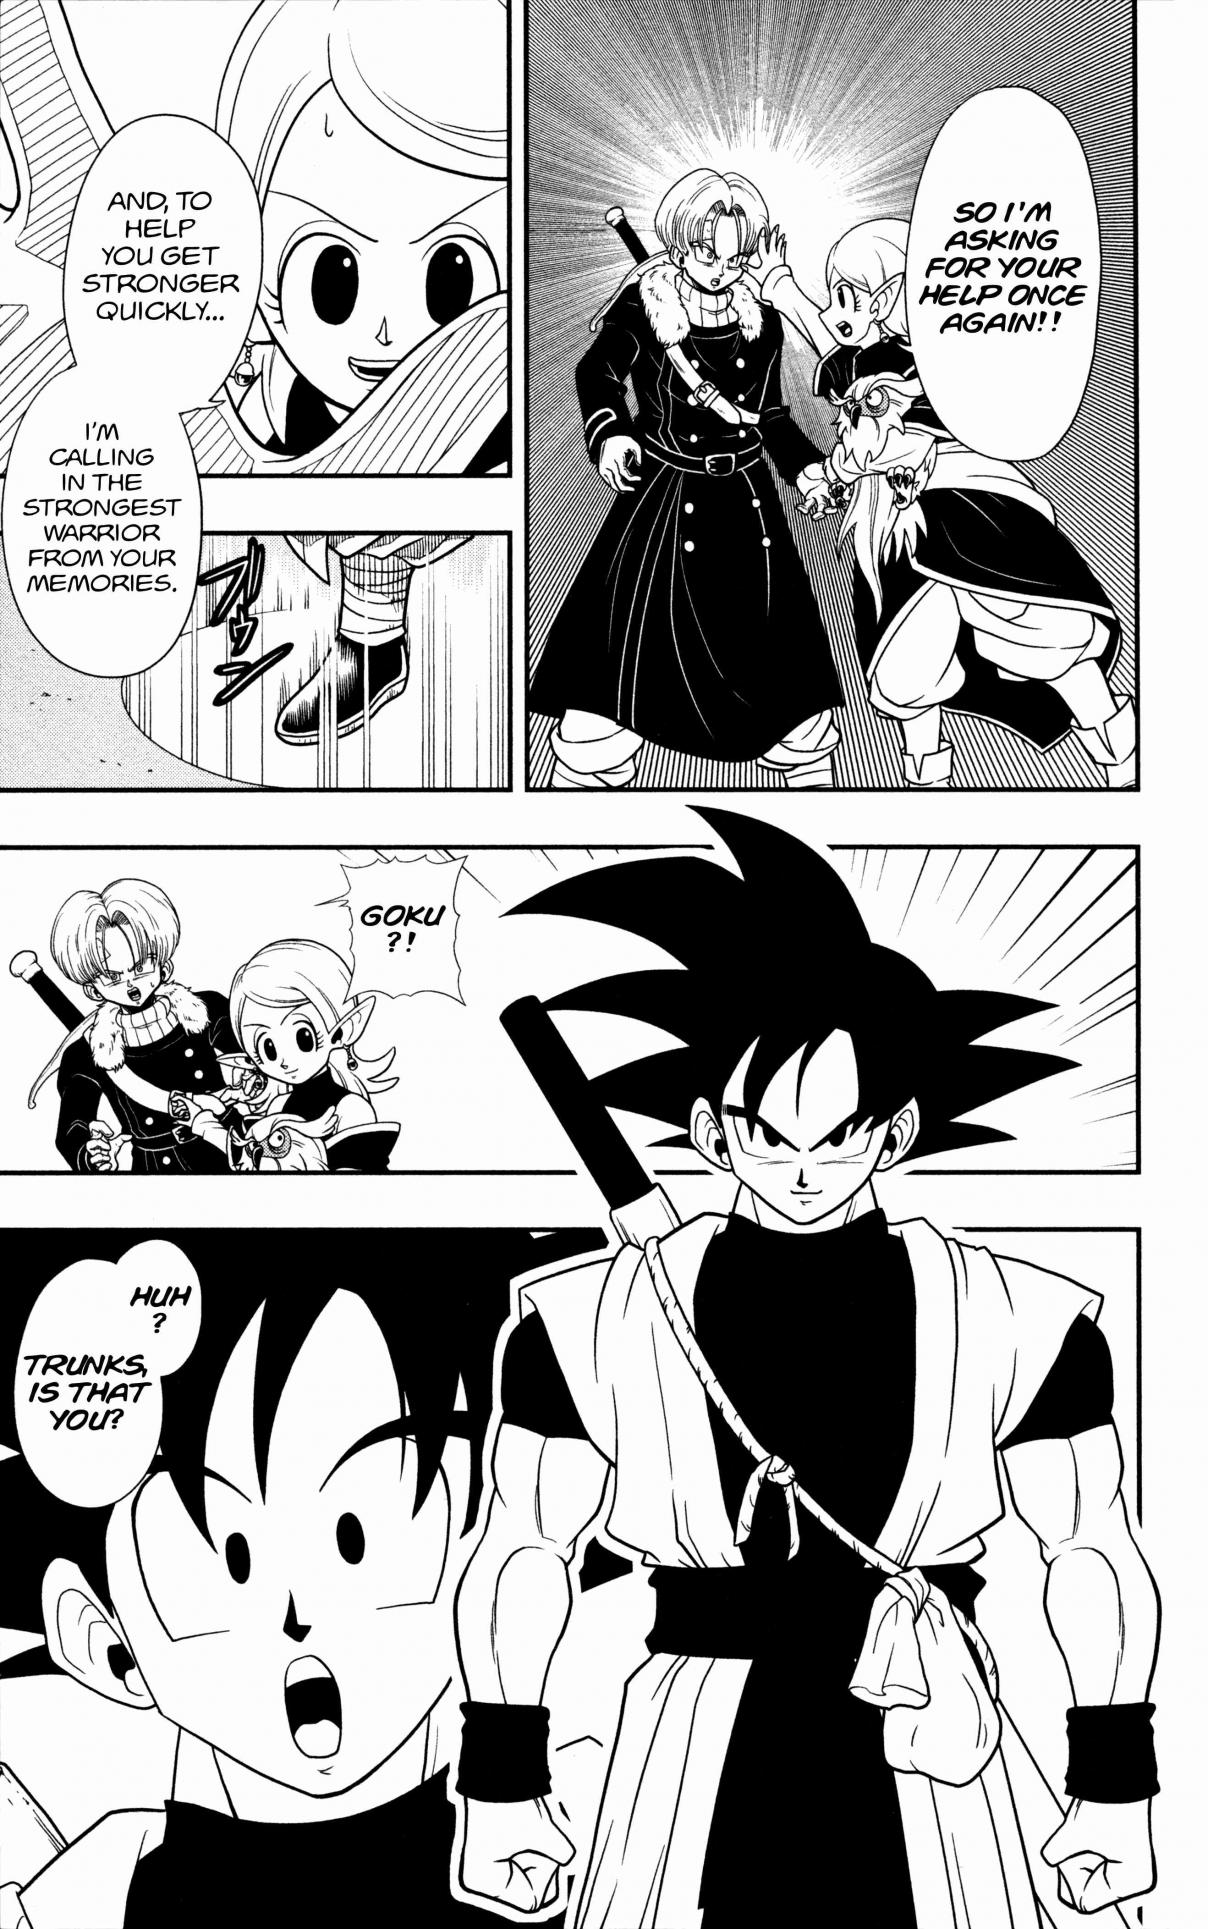 Super Dragon Ball Heroes: Dark Demon Realm Mission! Vol. 1 Ch. 1 Time Patrol, Move Out!